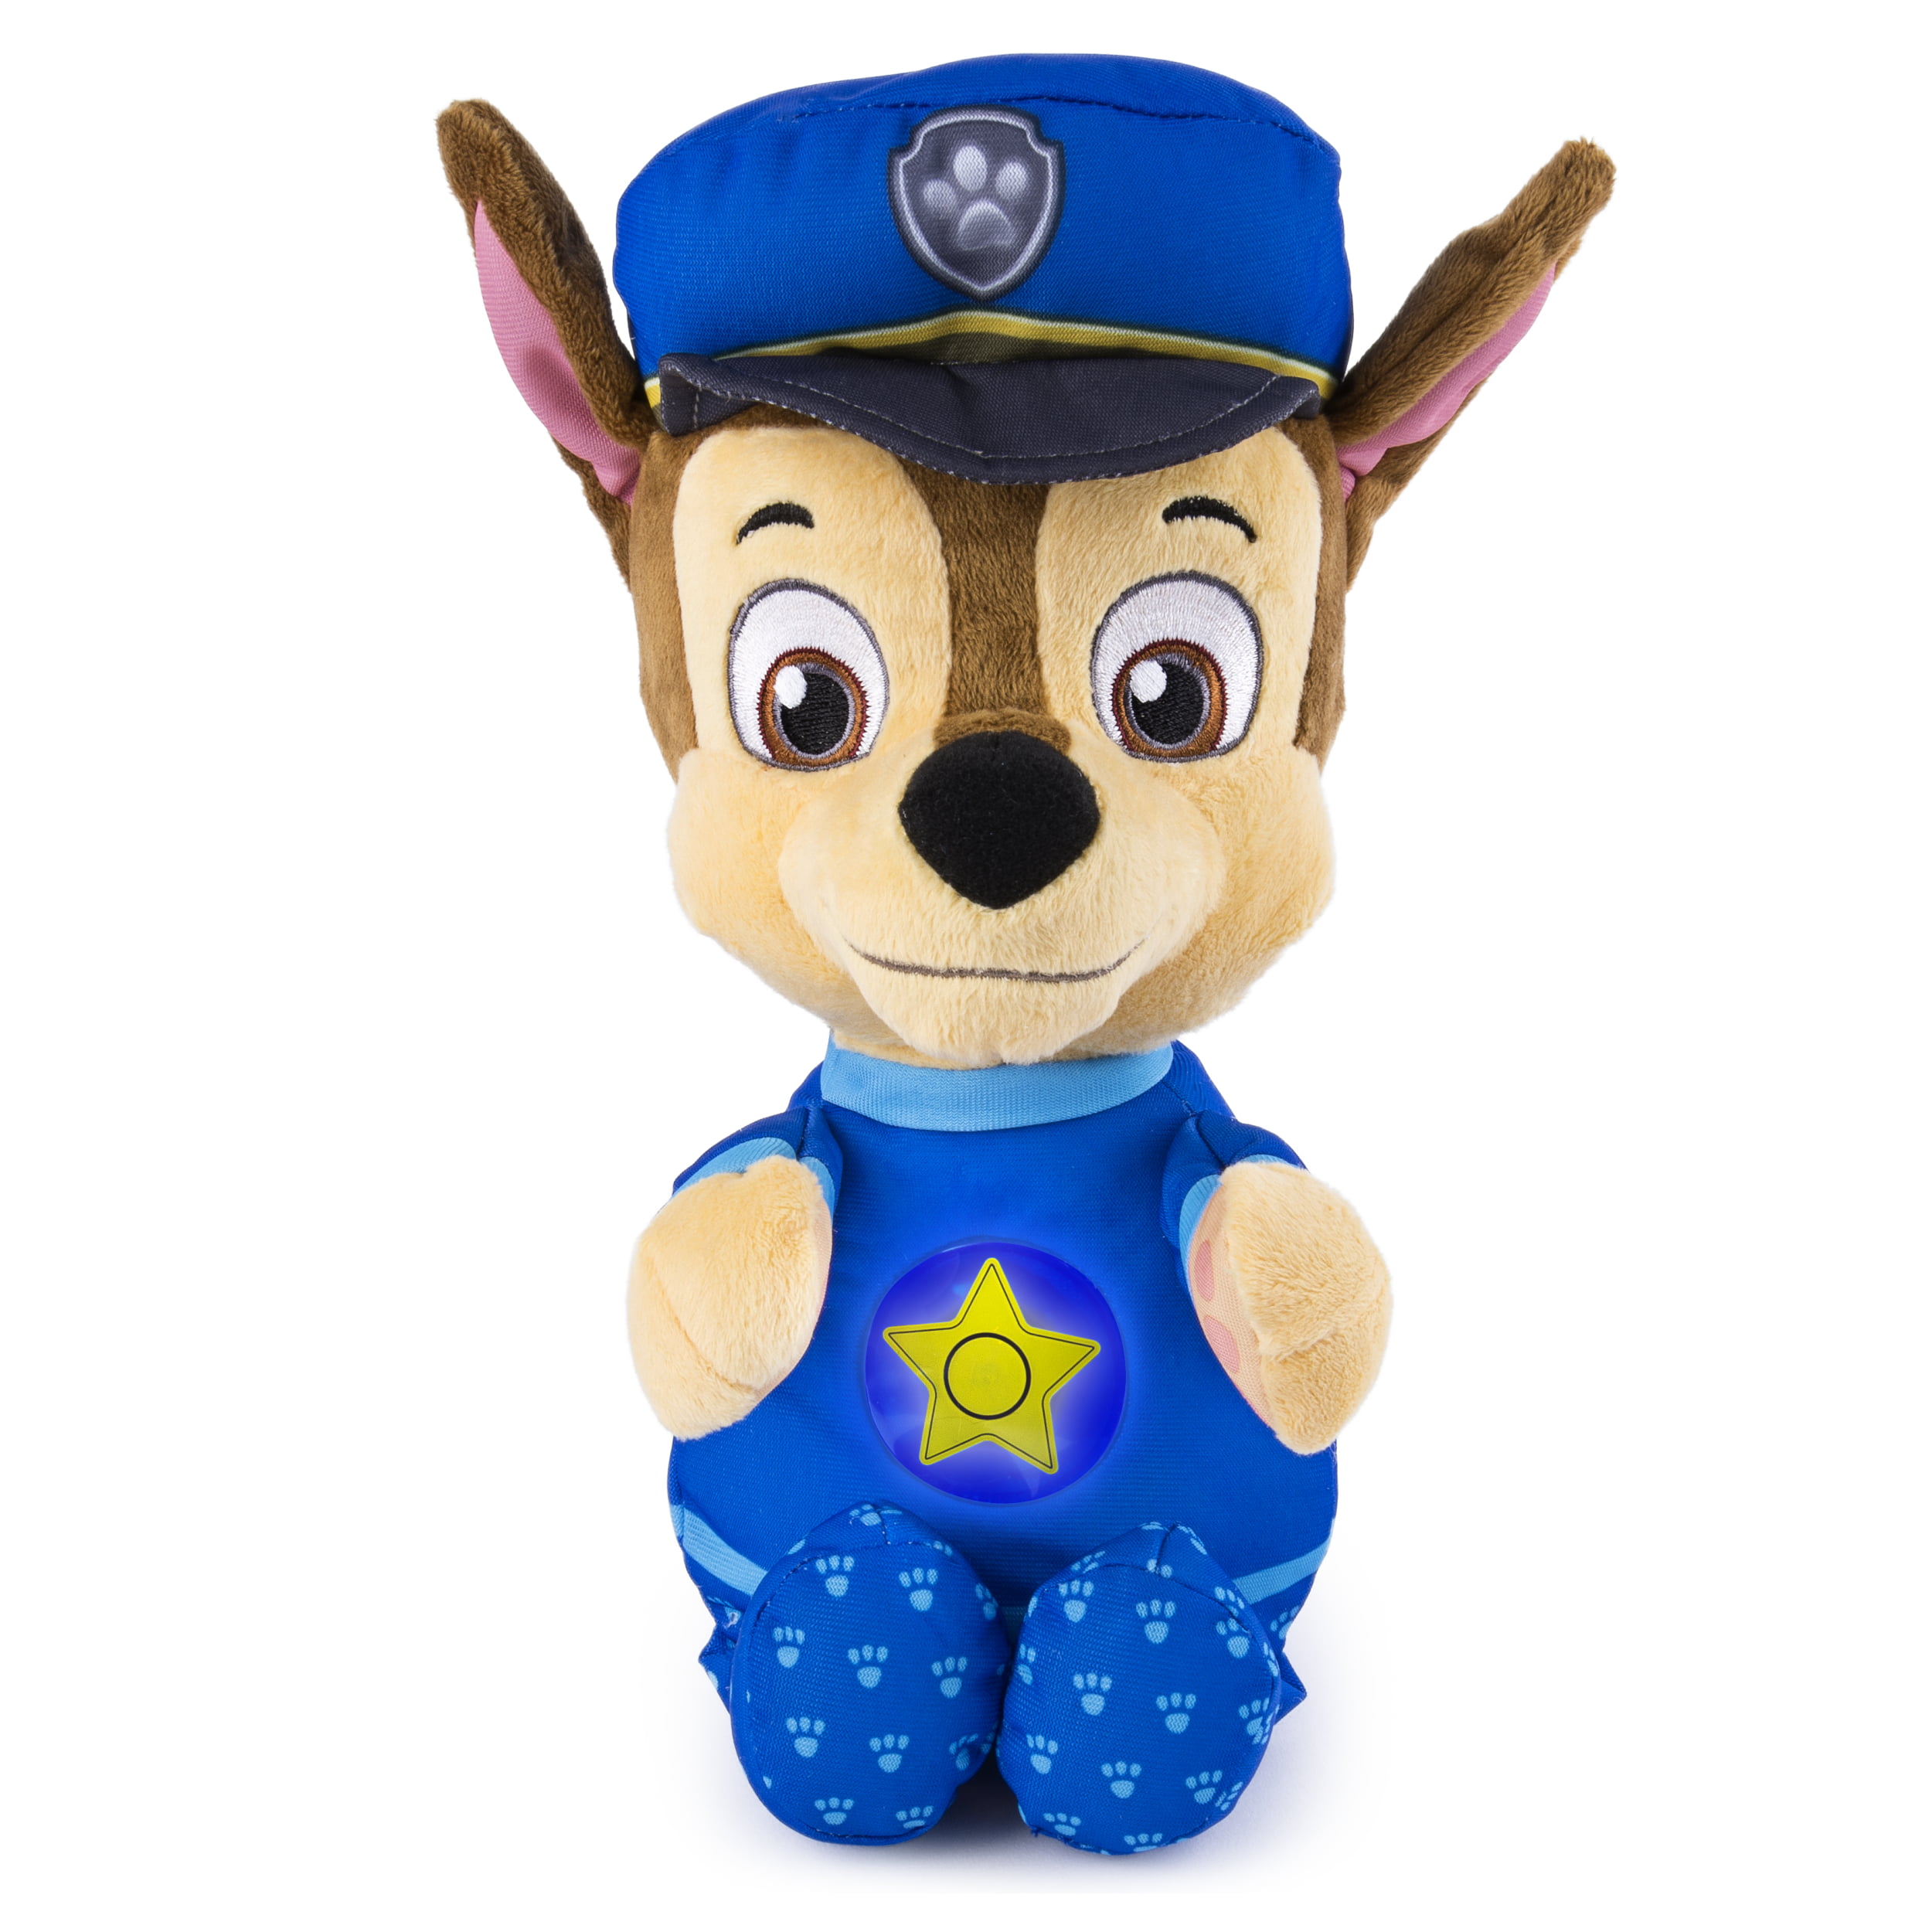 Paw Patrol 20cm Chase Plush Teddy Pup Pals Soft Cuddle Figure Character Stuffed